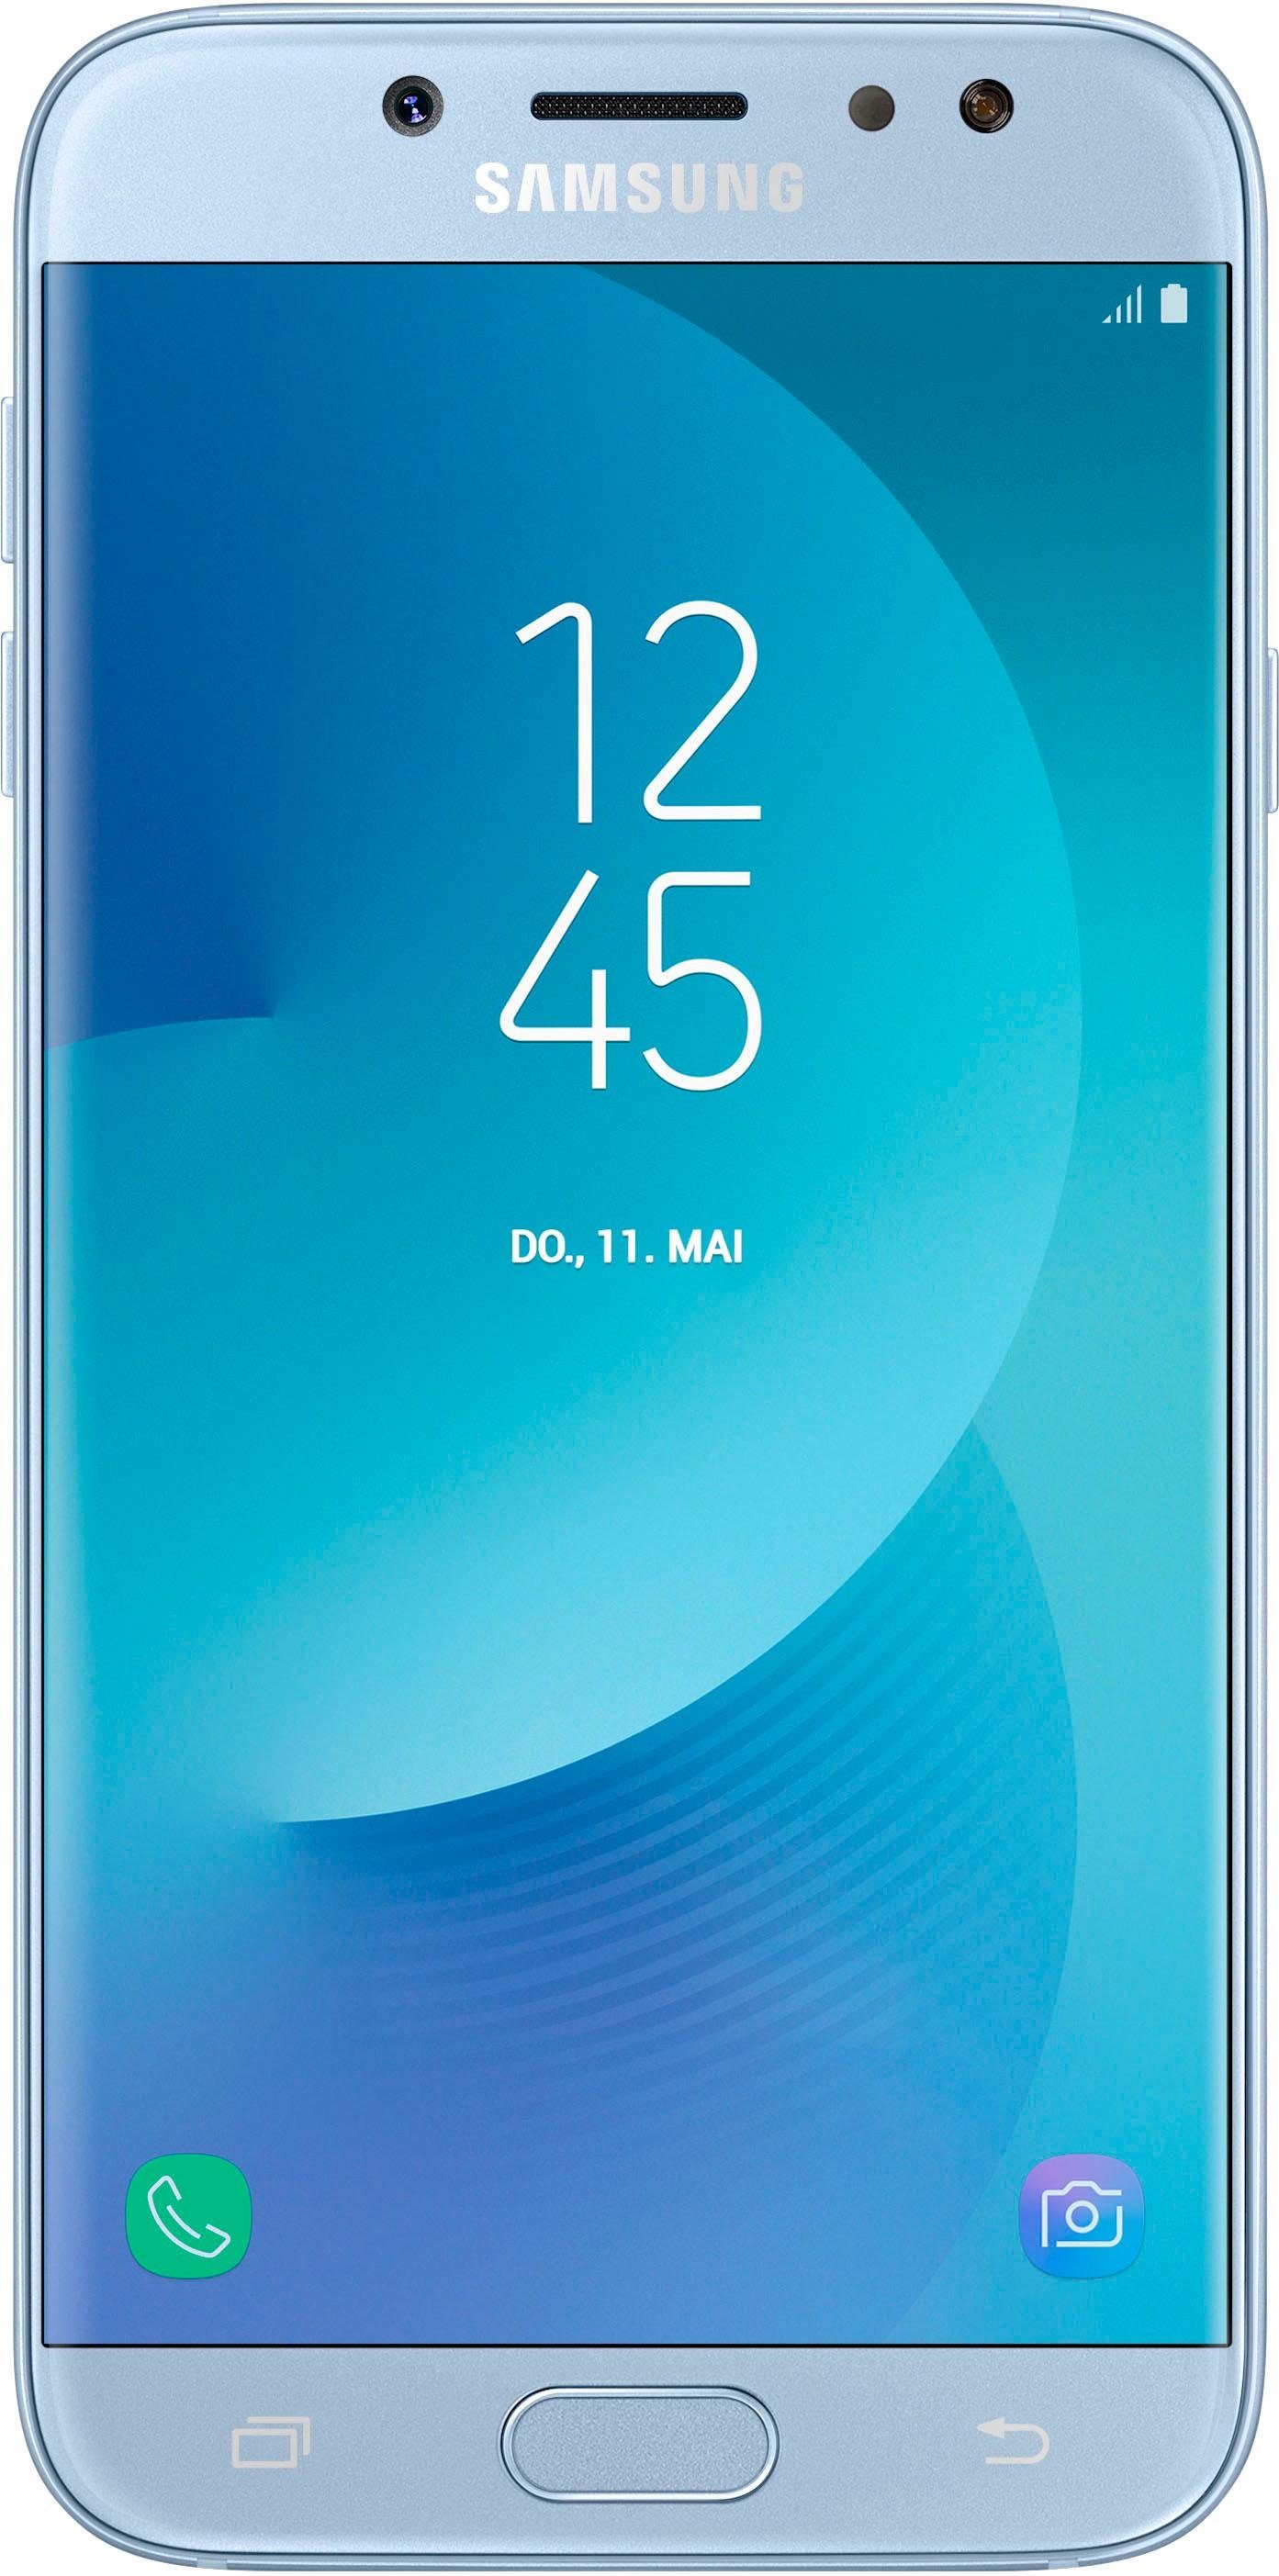 Samsung Galaxy J7 2017 DUOS Smartphone, 13,9 cm 5,5 Zoll Display, LTE 4G, Android 7.0 